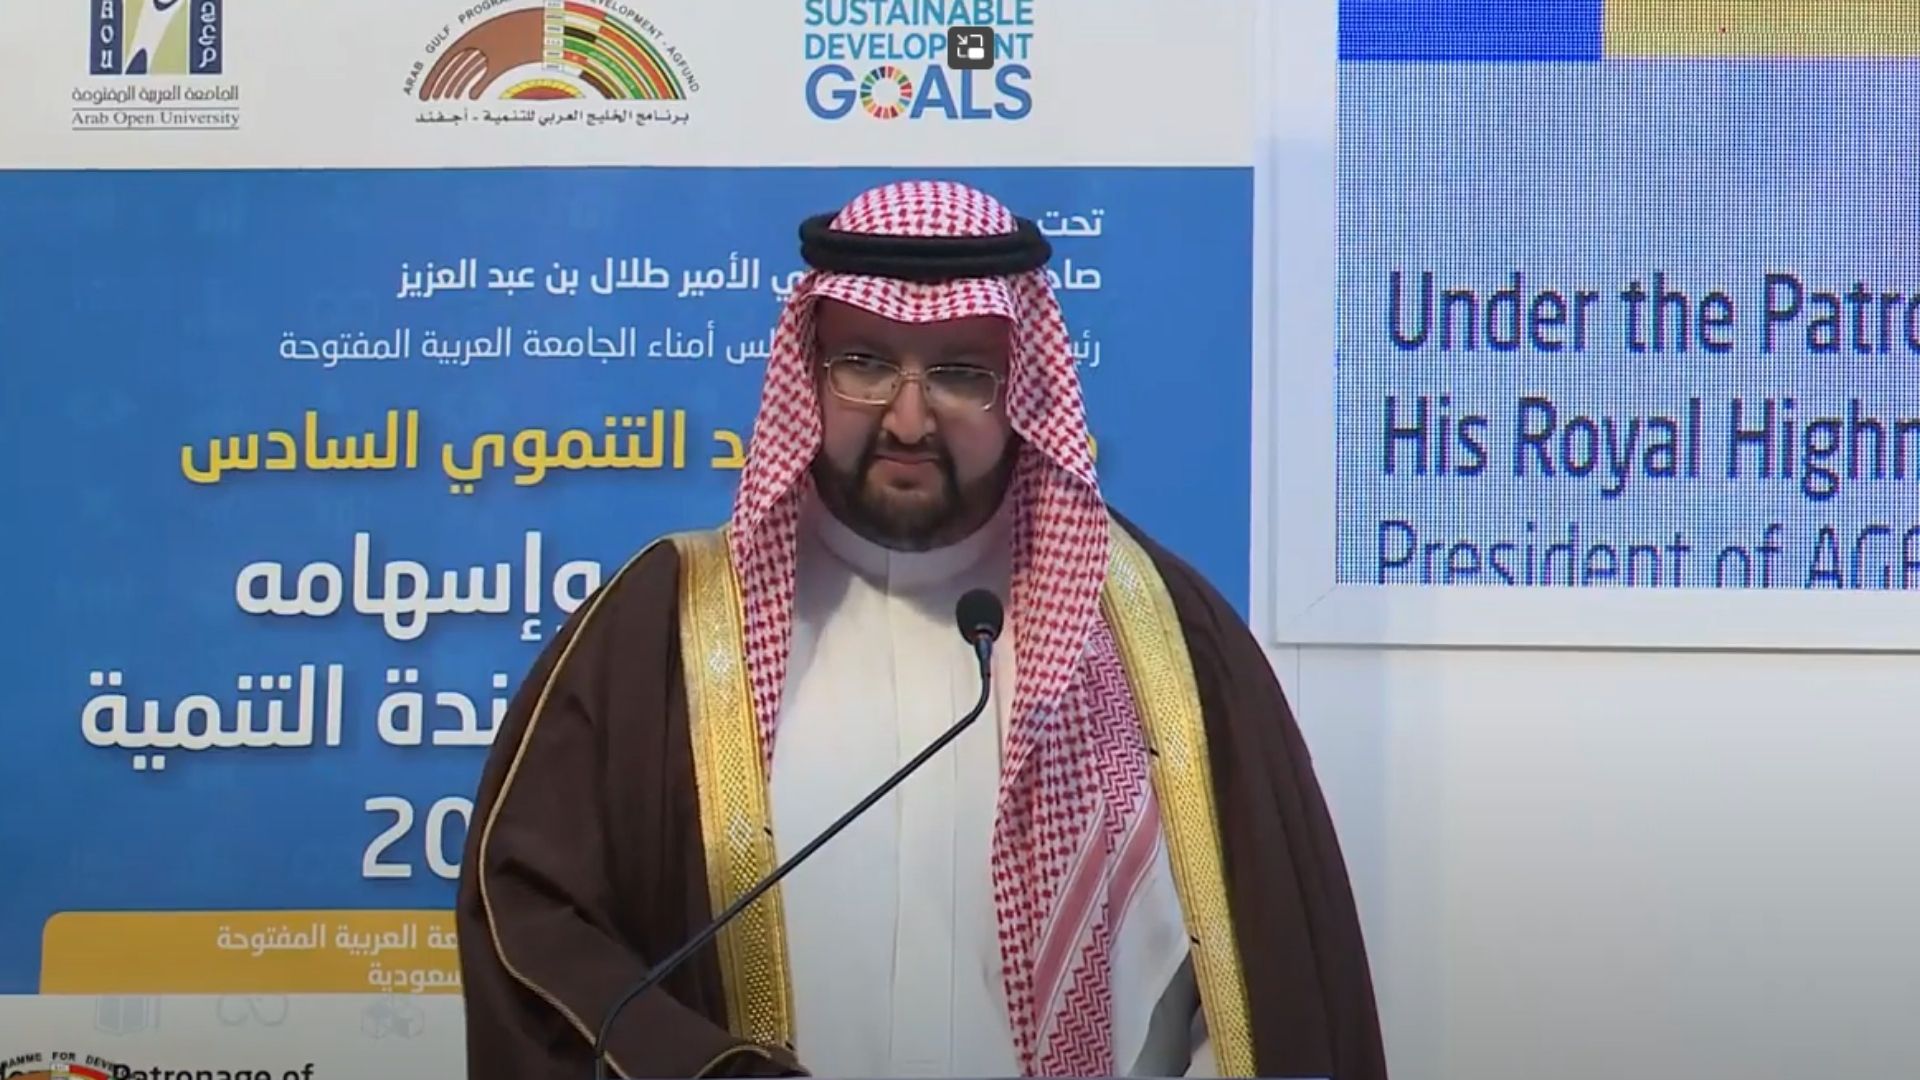 Speech of Prince Talal bin Abdulaziz, President of AGFUND, at the opening of the 6th AGFUND Development Forum